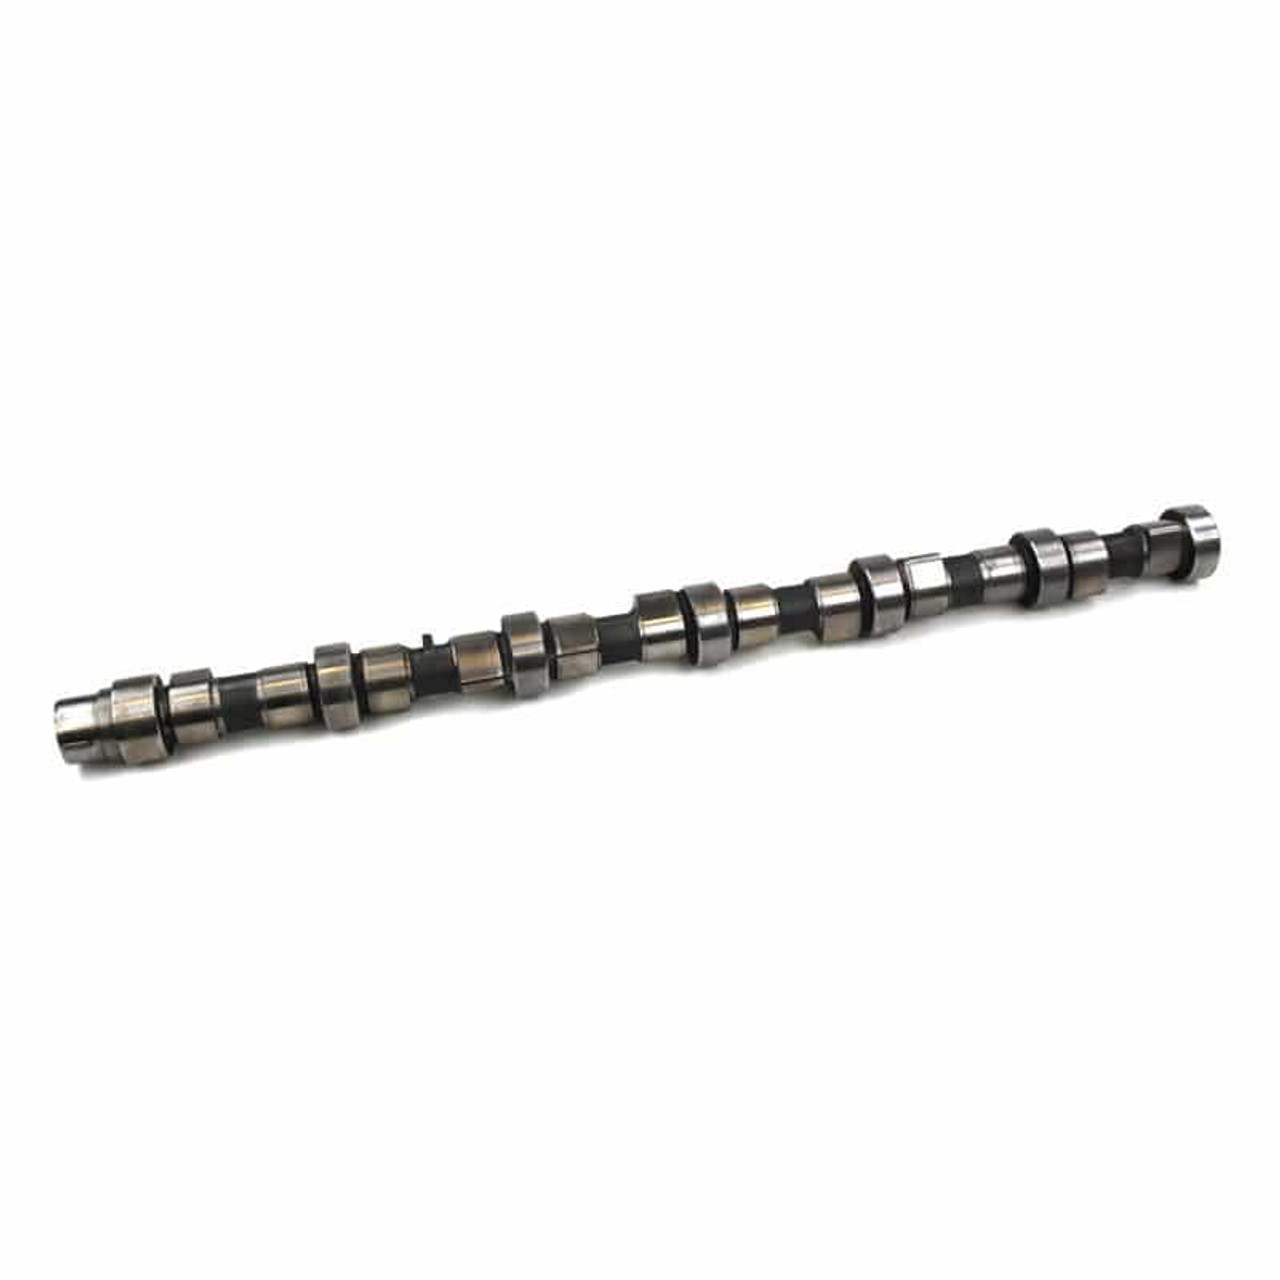  Industrial Injection CR Cummins Stage 2 Camshaft (210/220) for 2013 to 2018 6.7L Cummins (PDM-770HP)- Full View